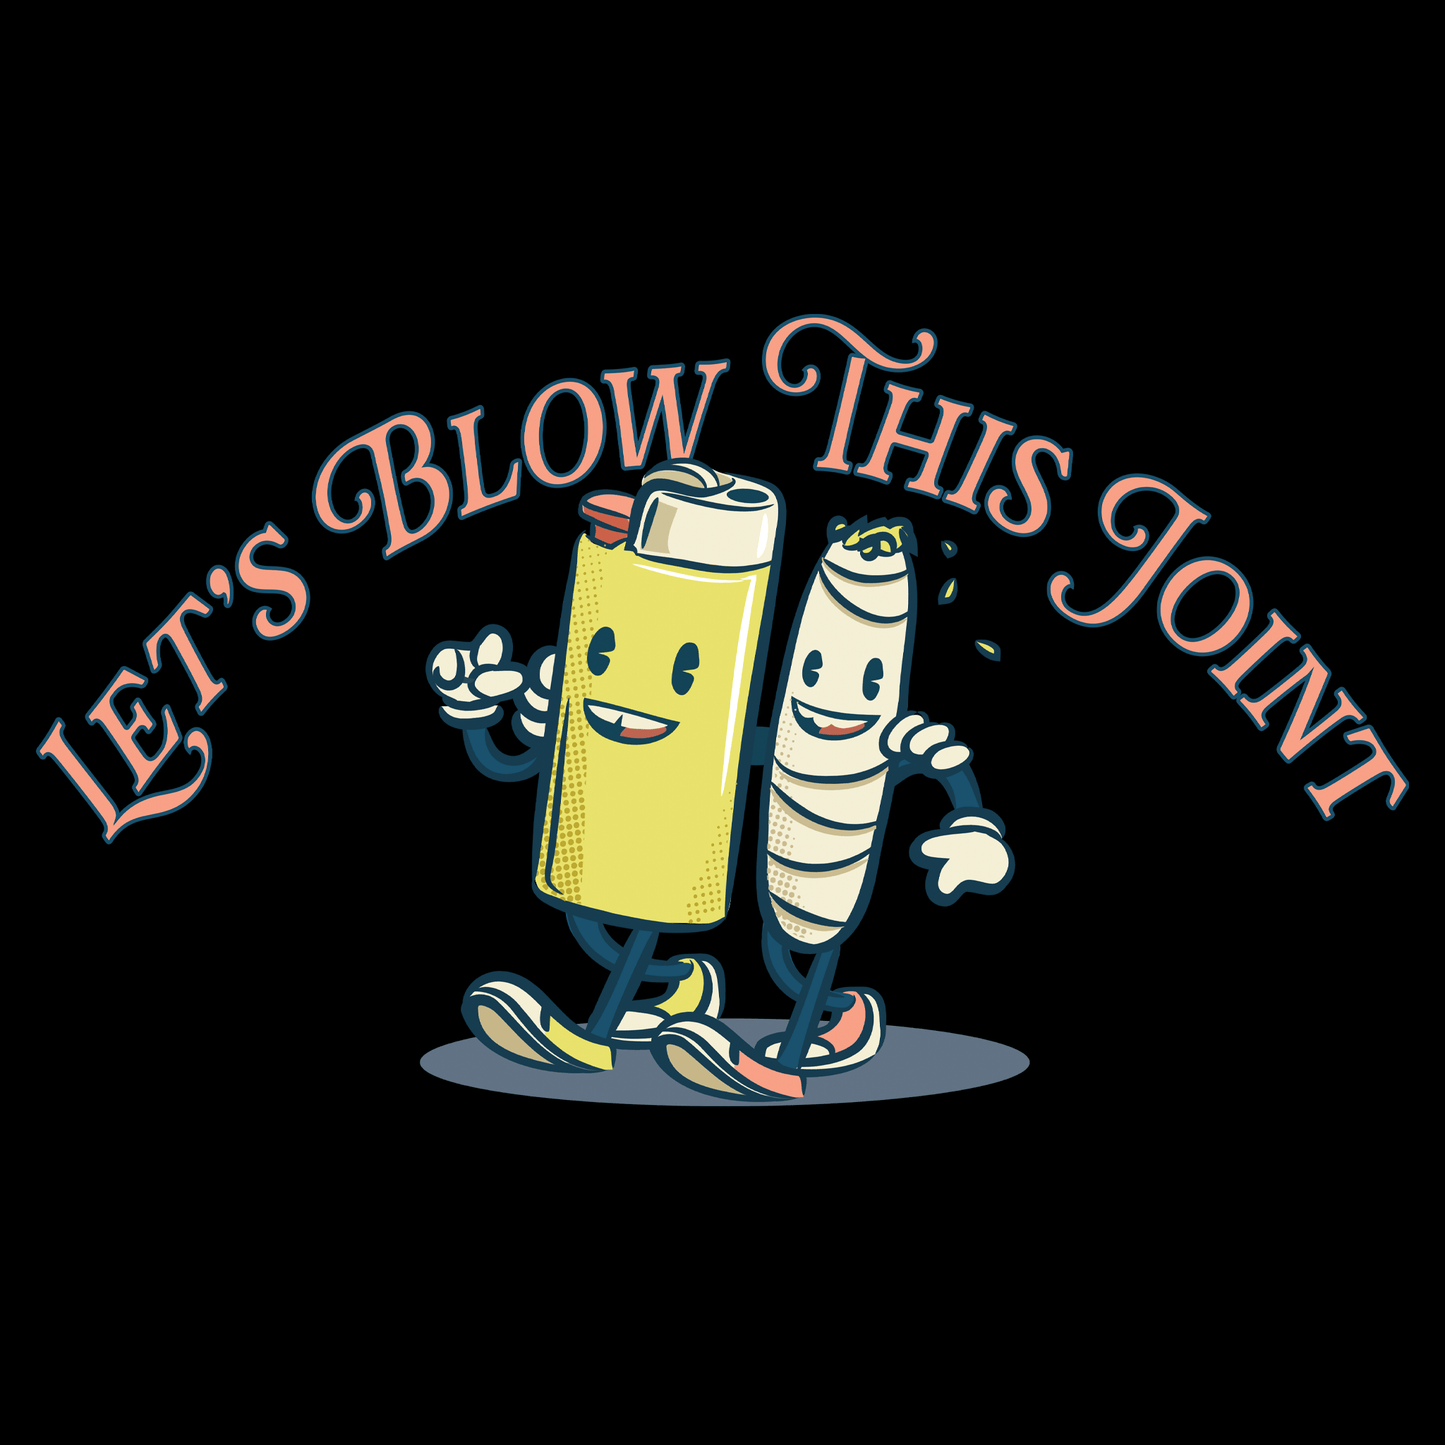 Let's Blow This Joint T-Shirt